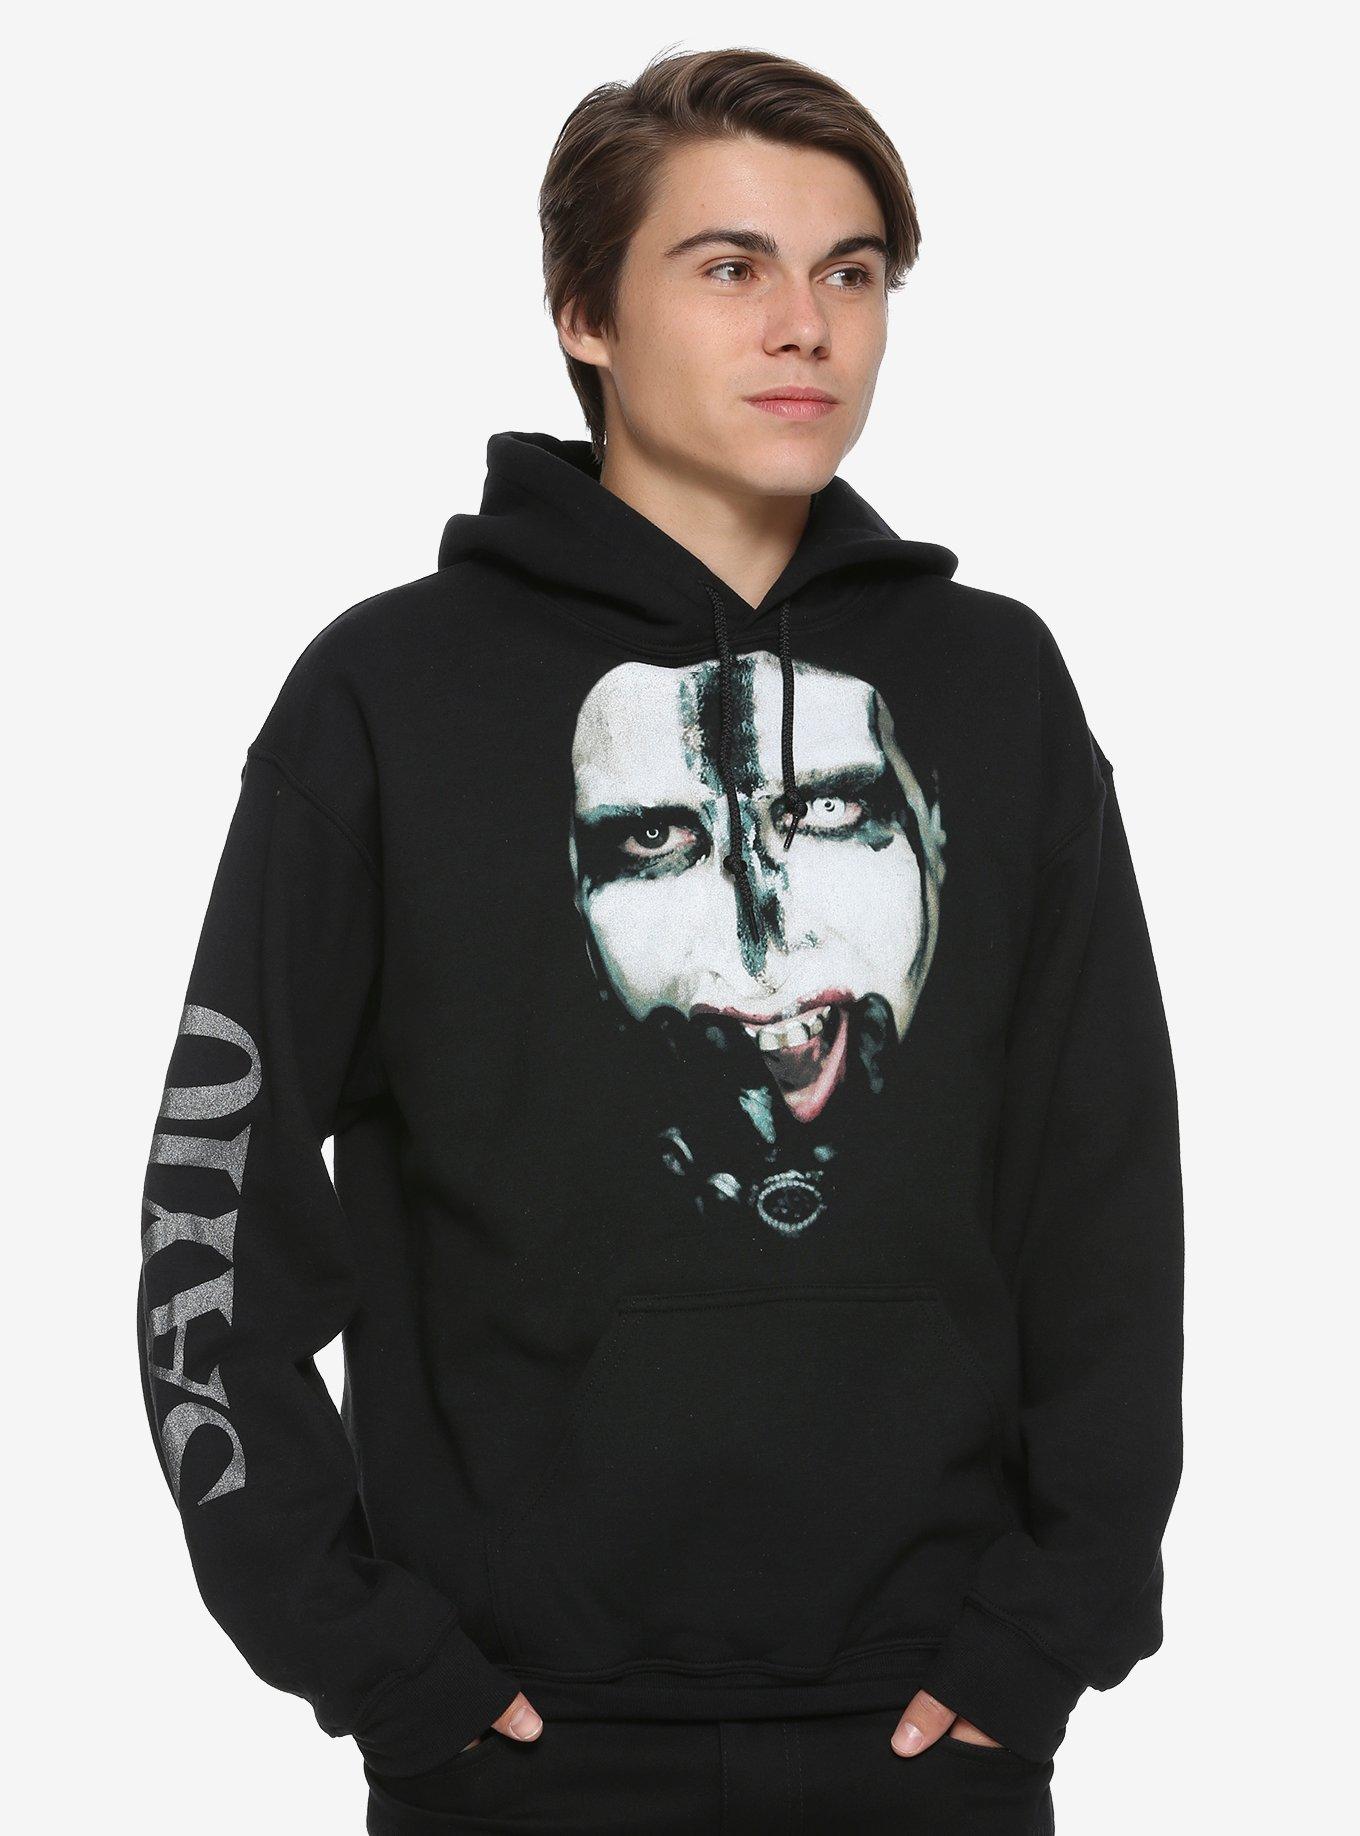 Marilyn Manson Say10 Face Hoodie | Hot Topic